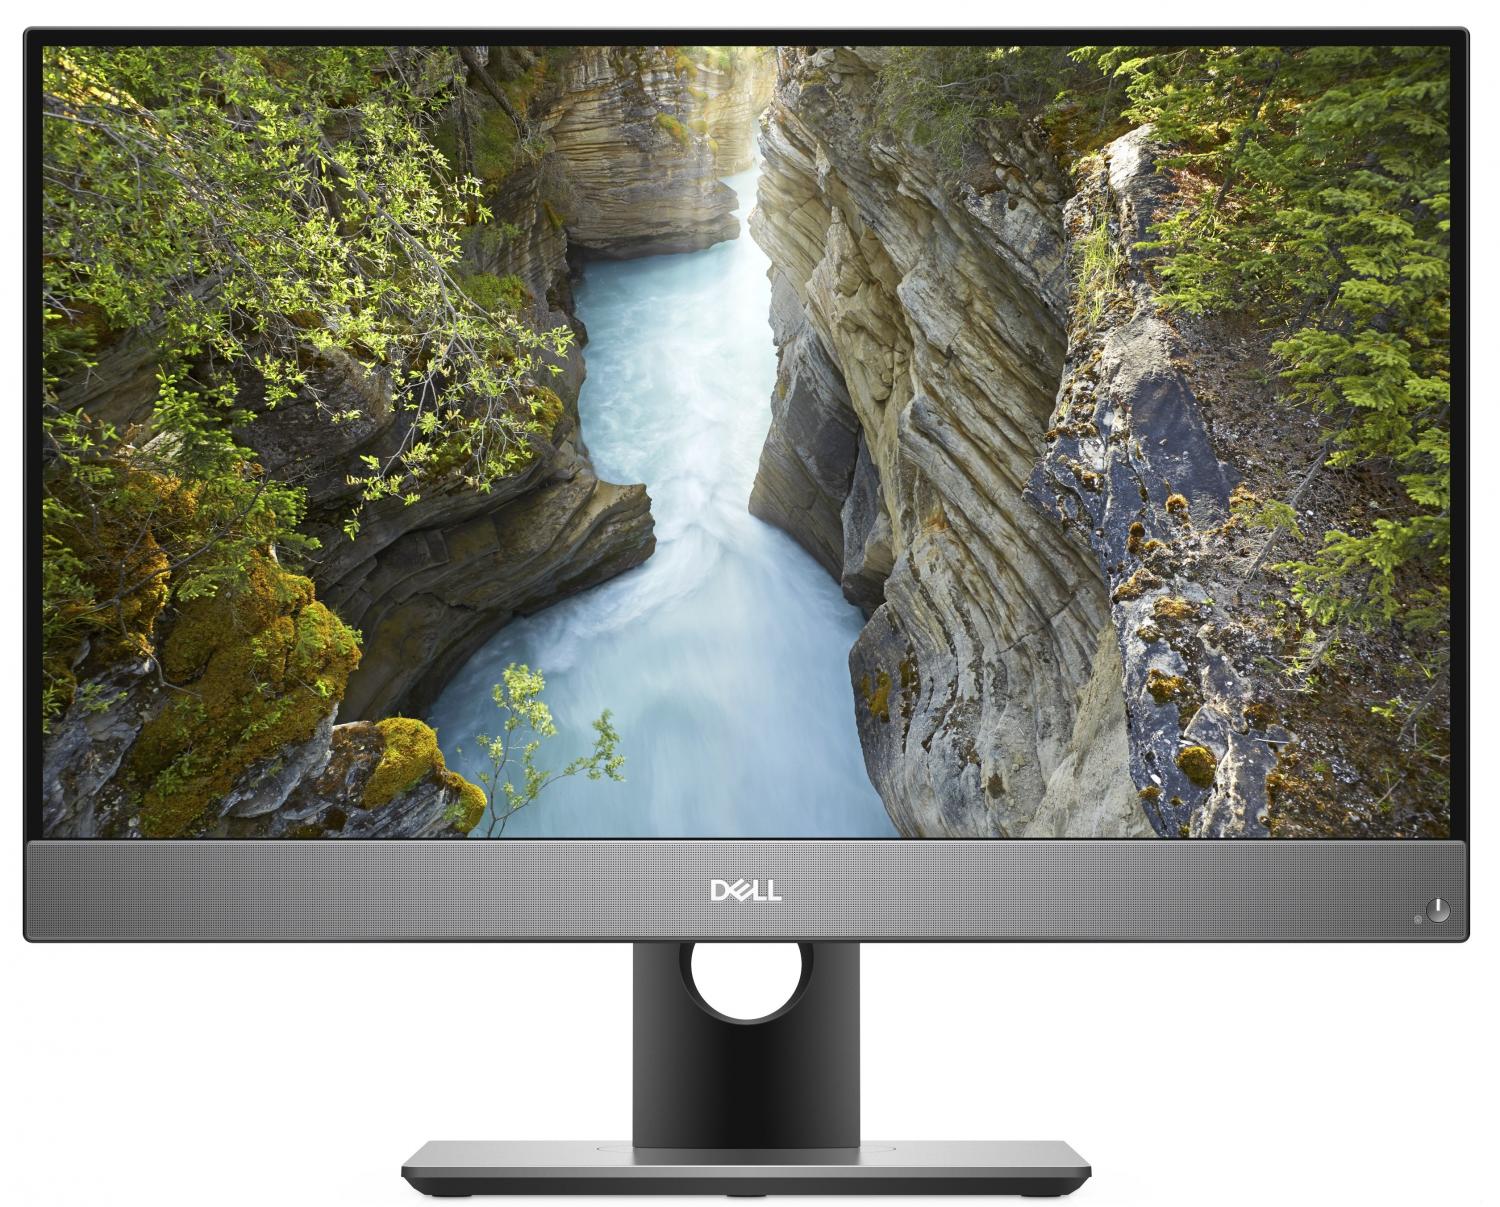 Моноблок Dell Optiplex 7780 AIO Core i5-10500 (3,1GHz) 27'' FullHD (1920x1080) IPS AG Non-Touch 8GB (1x8GB) DDR4 256GB SSD Intel UHD 630 Height Adjustable Stand,TPM Linux 3y NBD 7780-7694